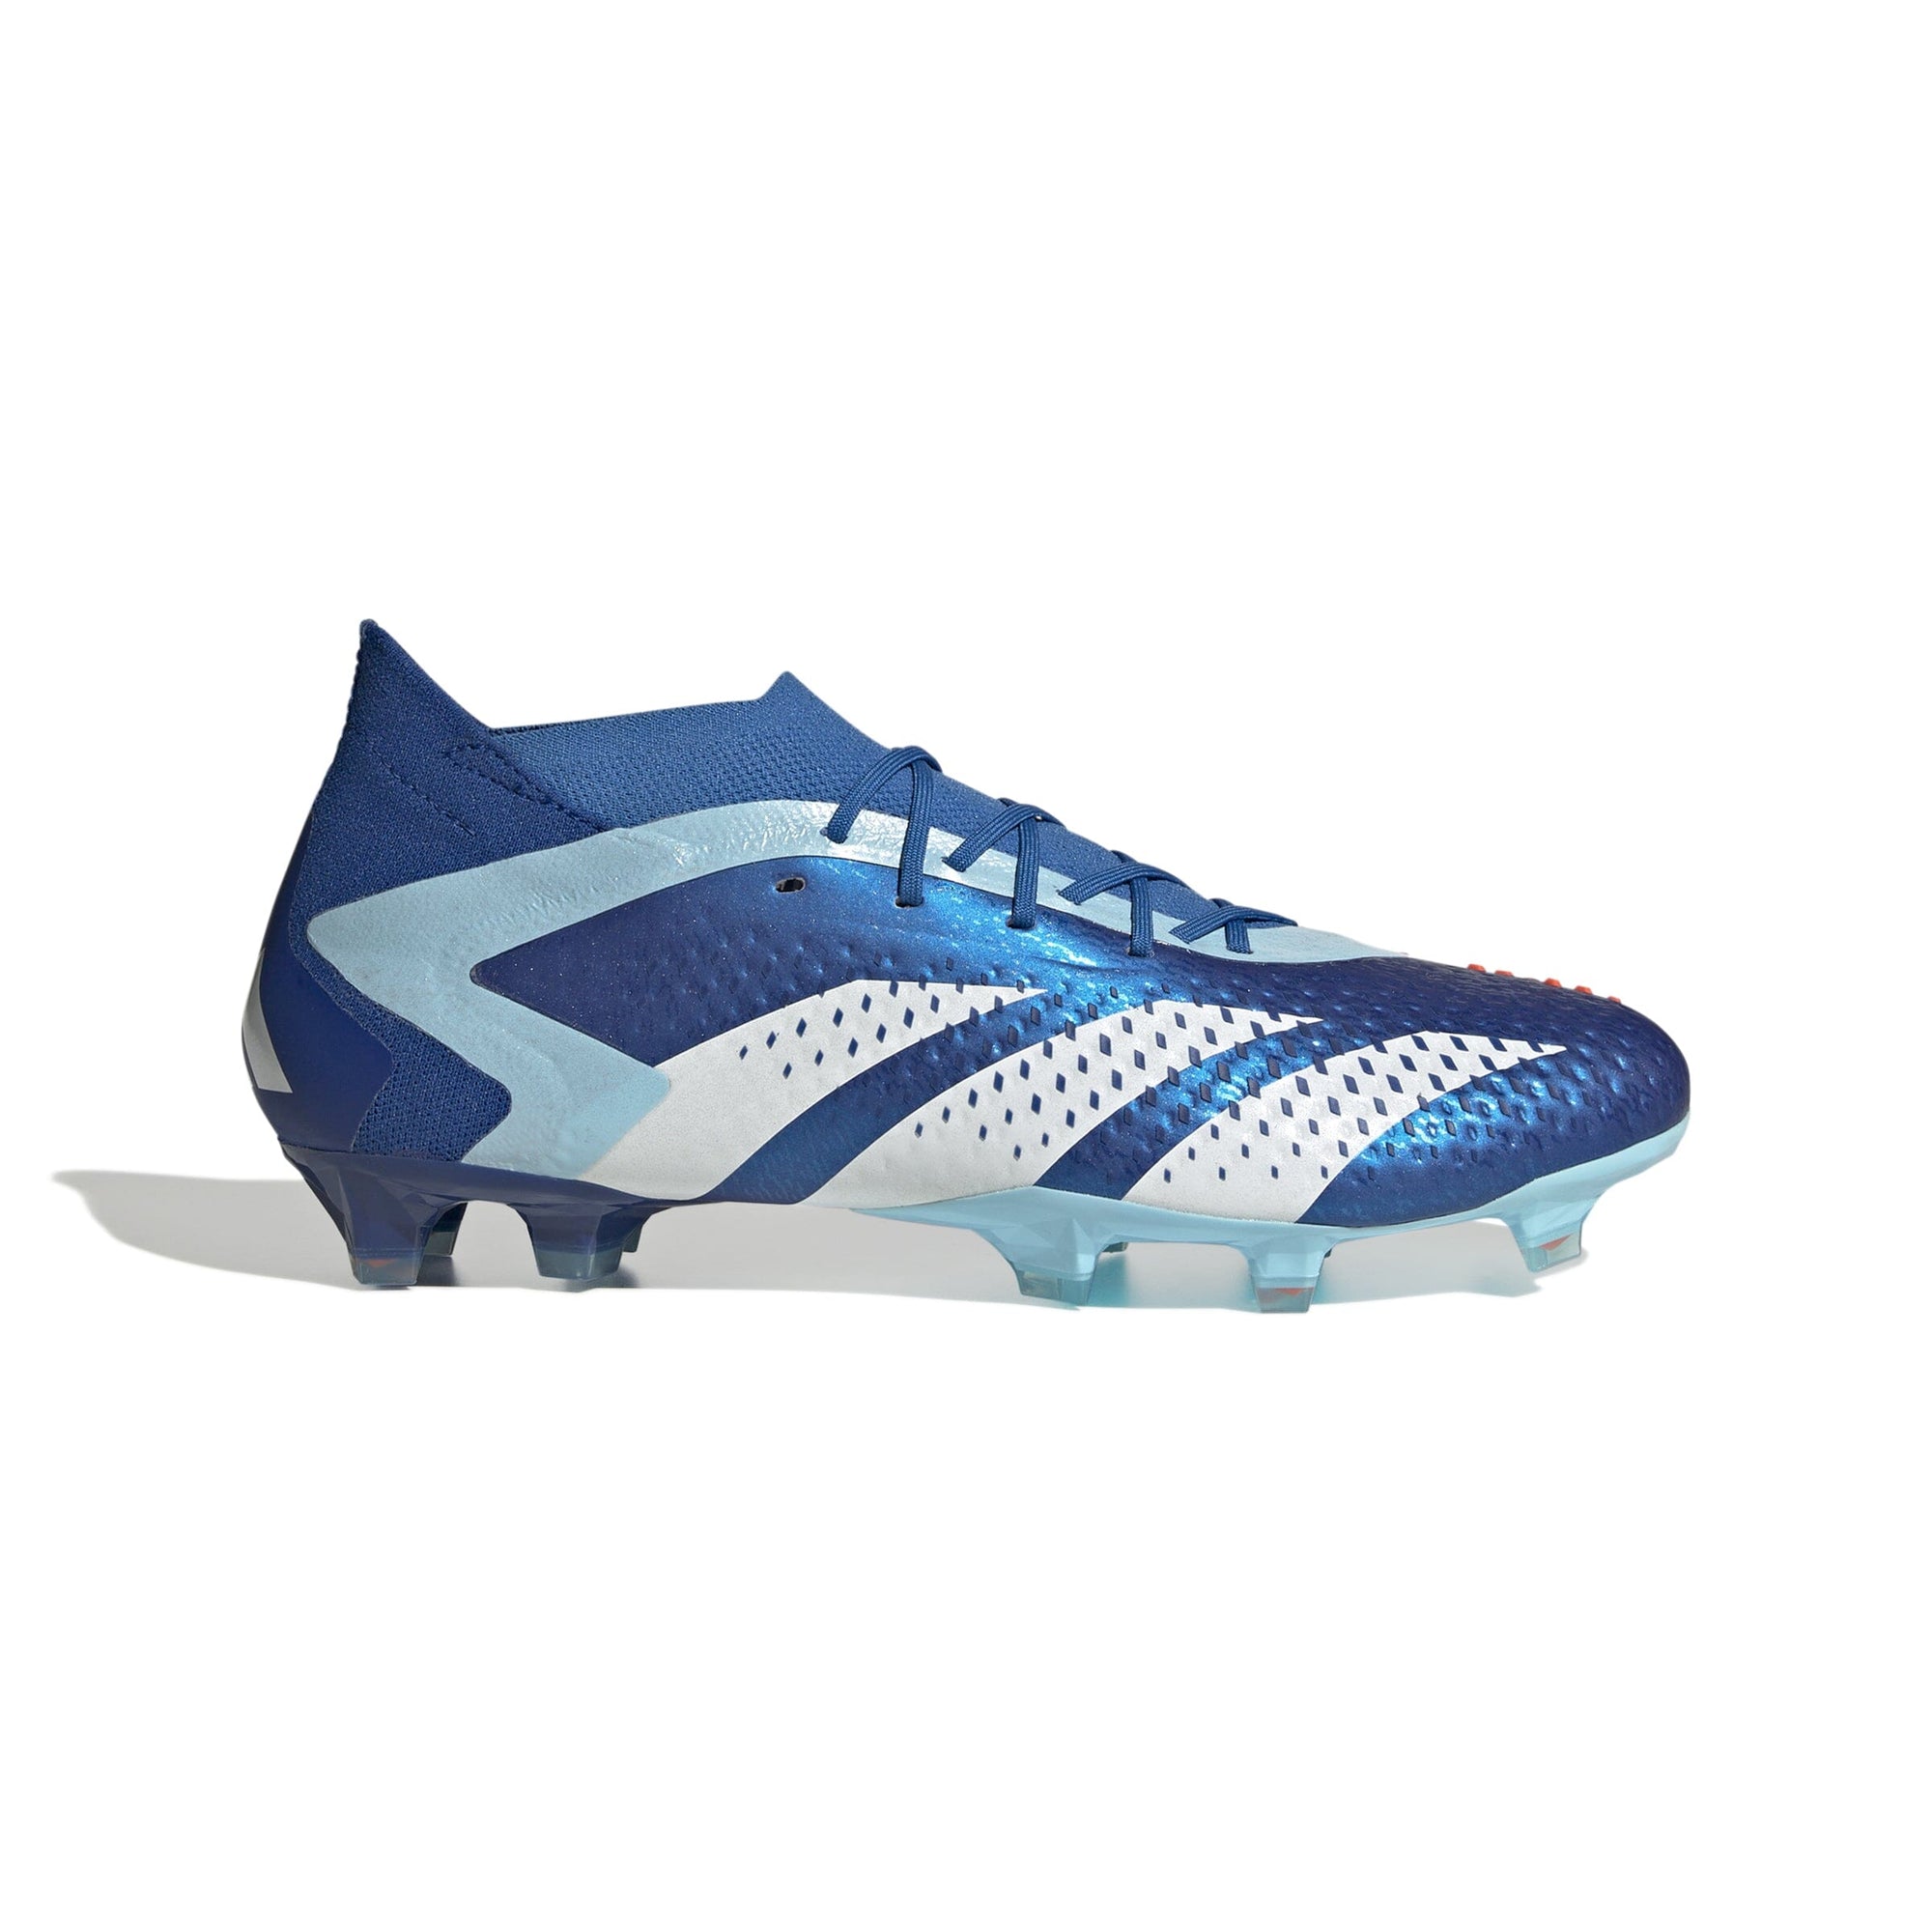 adidas Unisex Predator Accuracy.1 Firm Ground Cleats | GZ0038 Cleats Adidas 8.5 Bright Royal / FTWR White / Bliss Blue 